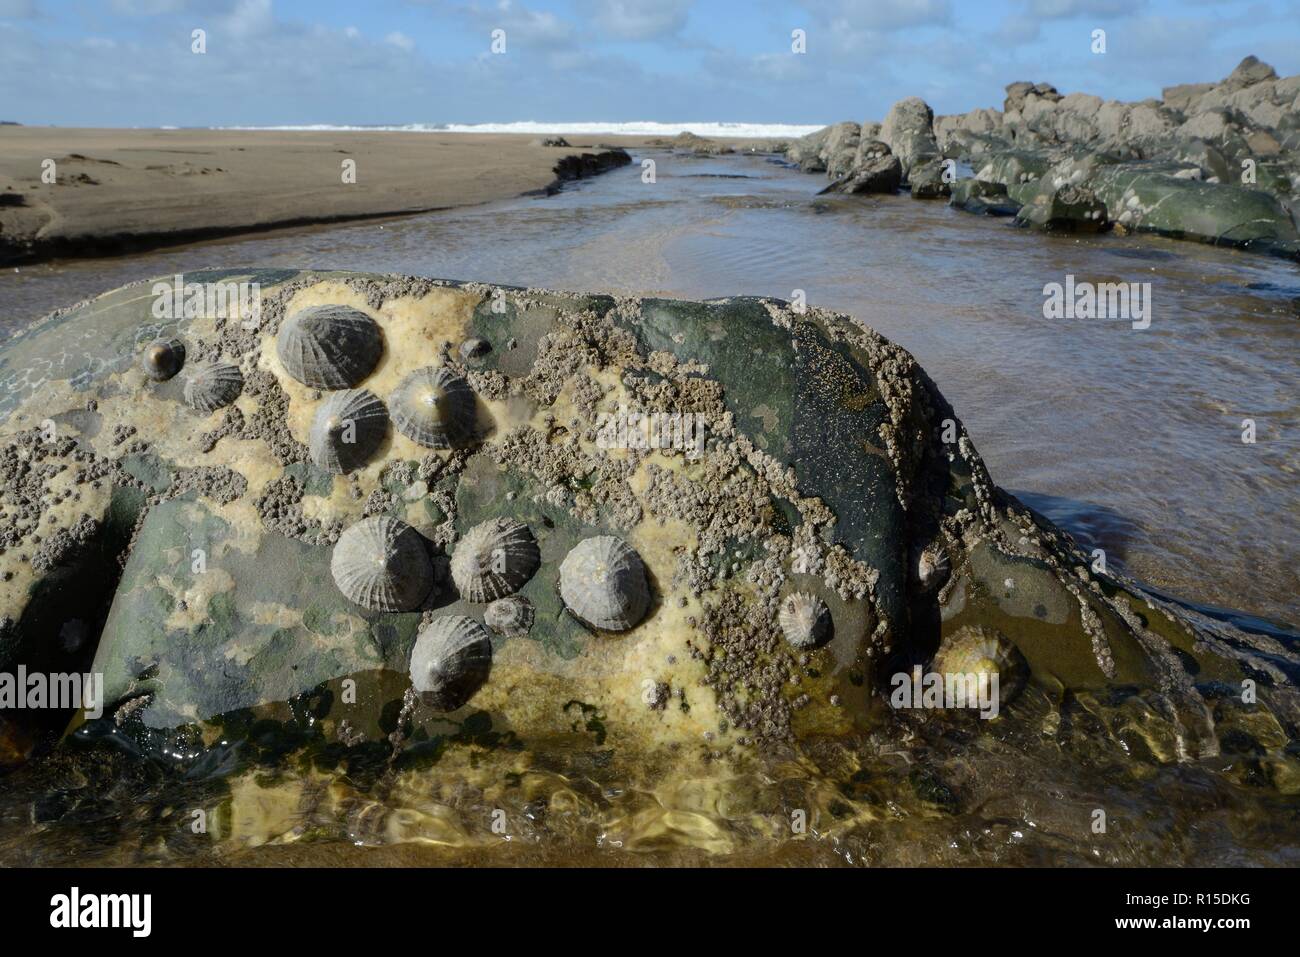 Common limpets (Patella vulgata) attached to an intertidal boulder, exposed by a falling tide, Cornwall, UK, September. Stock Photo